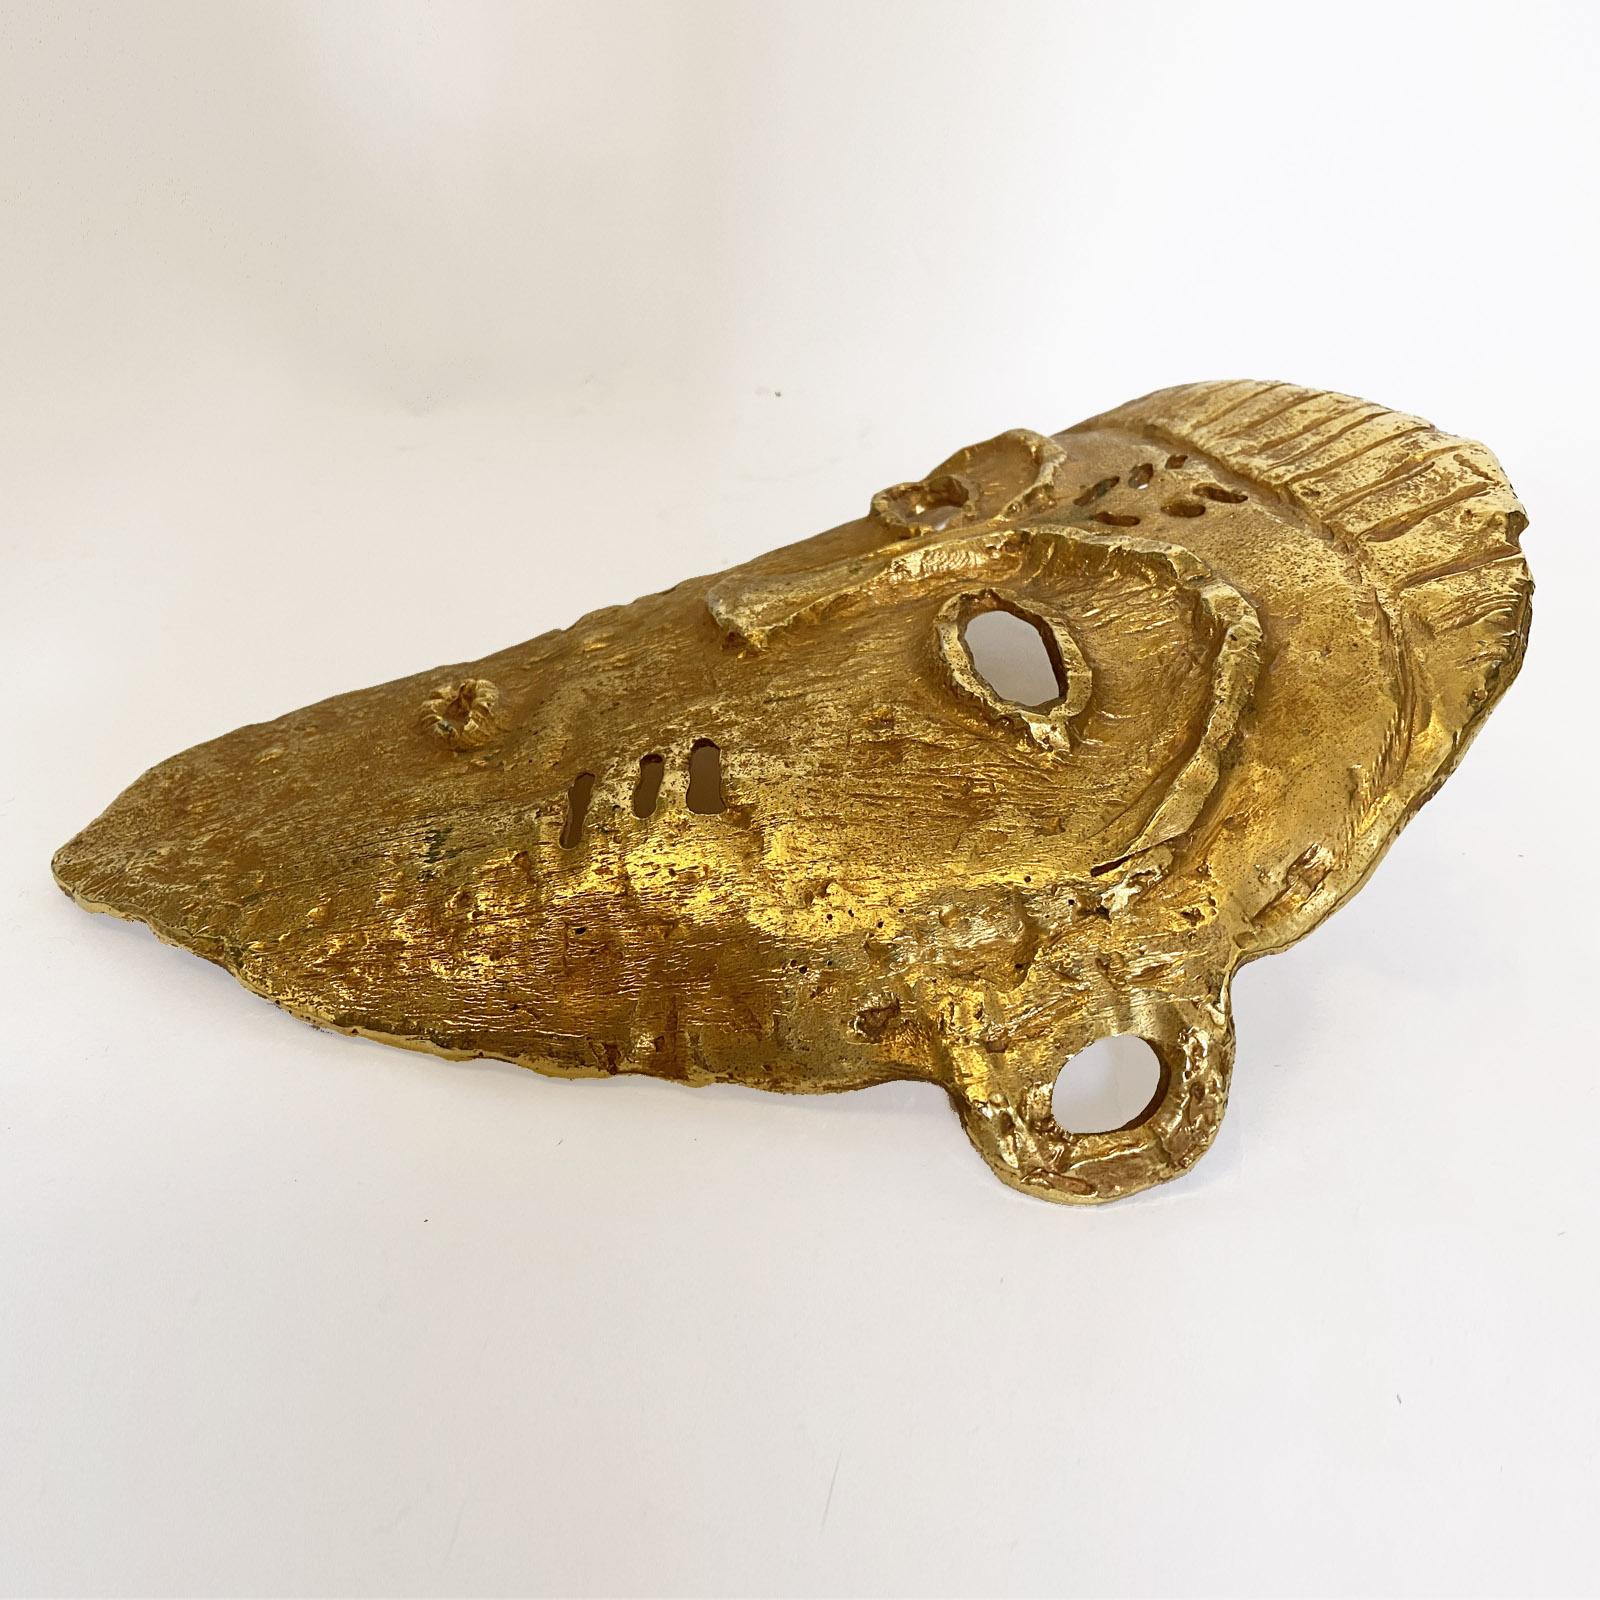 Gilded Cast Aluminium Sculptural Mask by Linda Hattab for Fondica, France, 1990s. 
Can be turned into a sconce.